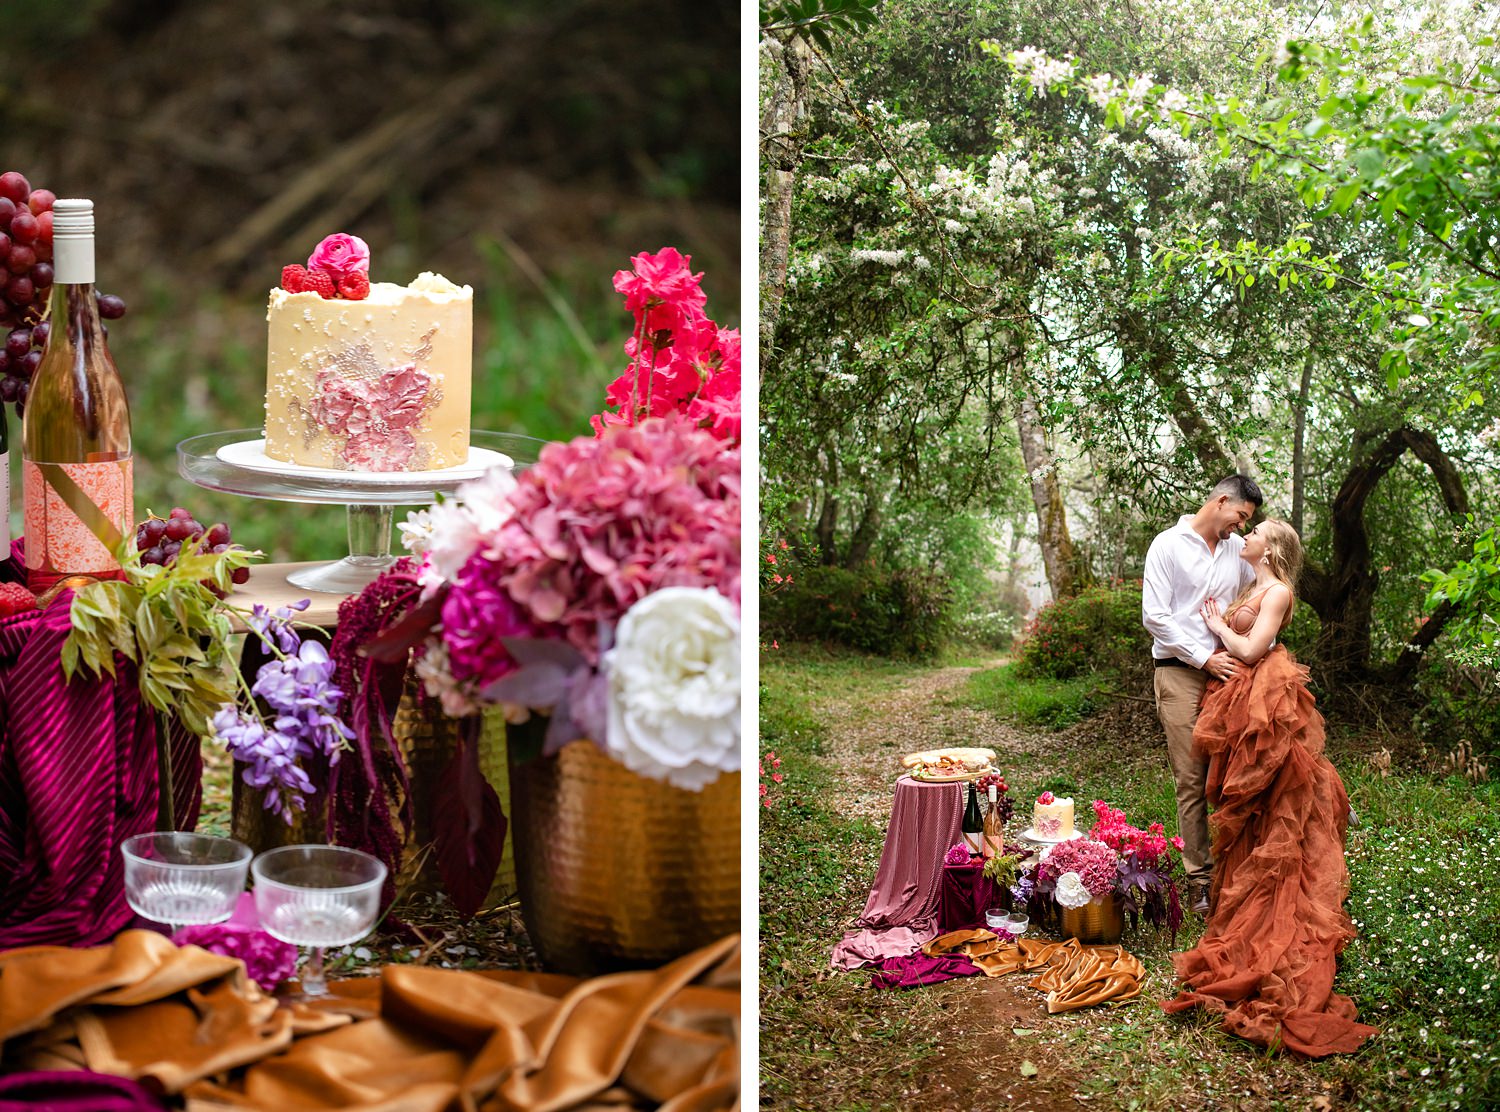 An elopement picnic awaits the bridal couple after their photoshoot, with burgundy and gold velvet lining the tables, a beautiful floral cake by Antonios Cakes and Treats, and champagne from Newstead Wines.